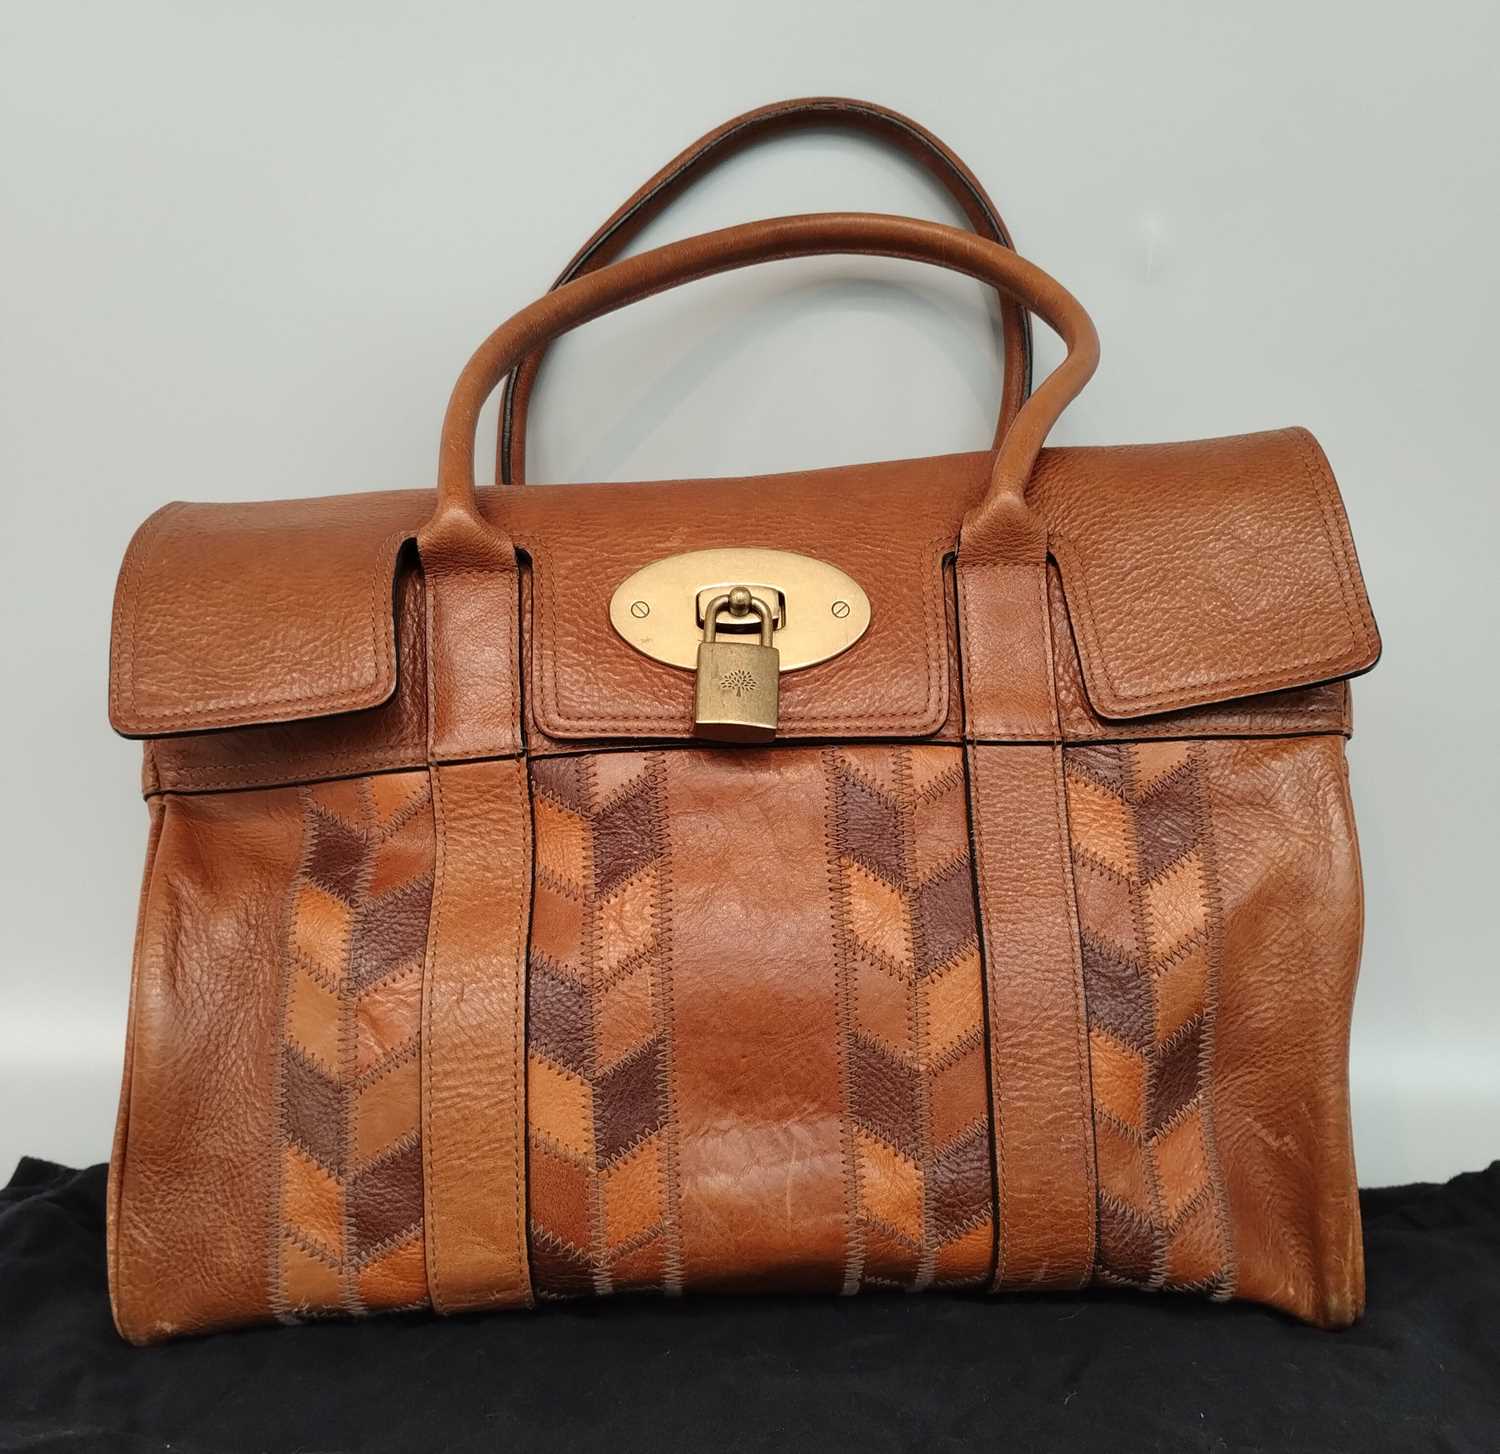 Mulberry Tan Leather Bayswater Rio Patchwork Bag with brass hardware, adjustable tabs and buckles,